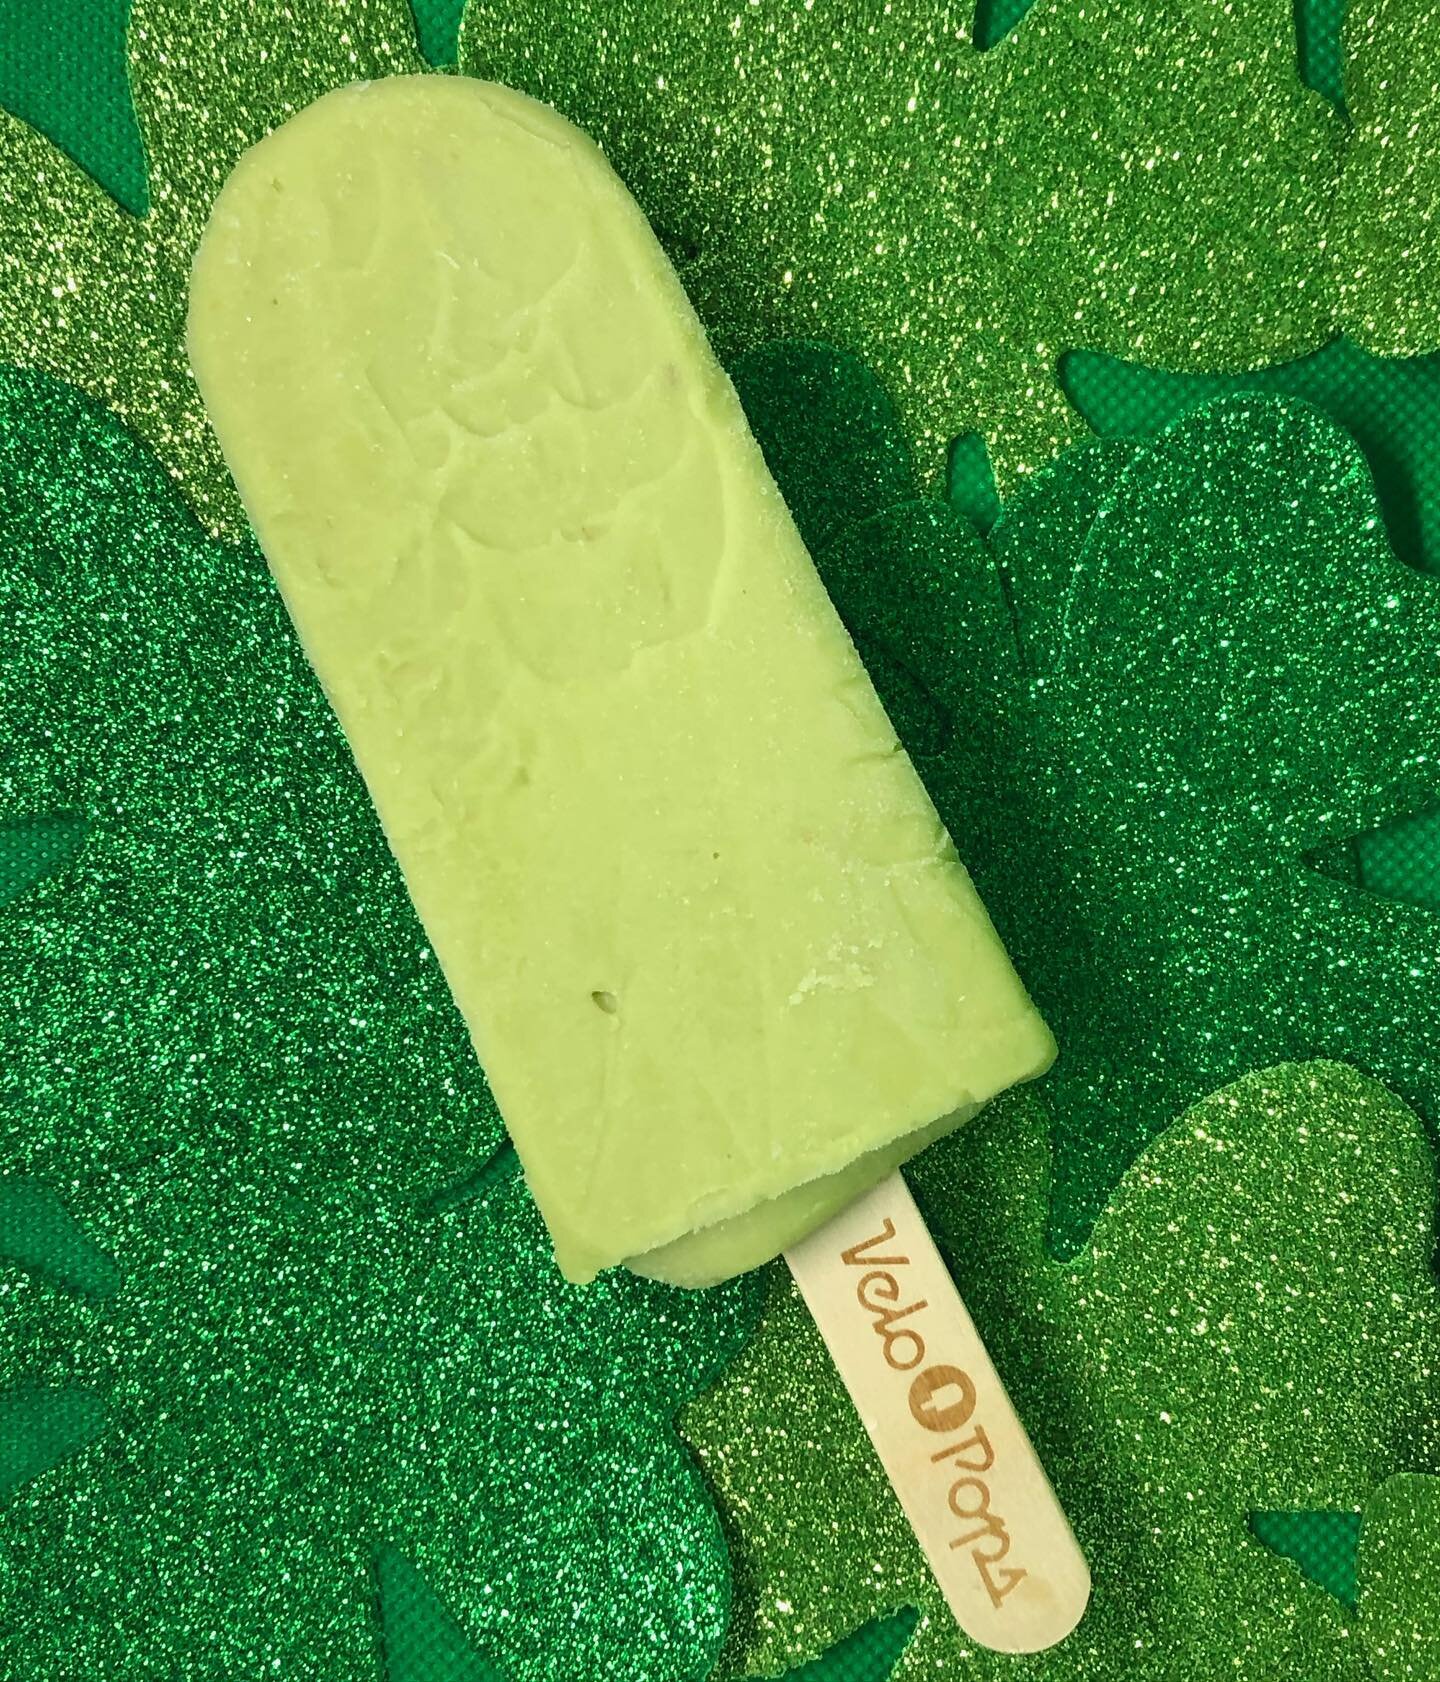 We know that Avocados and Limes don&rsquo;t scream St Patrick&rsquo;s Day, but if you&rsquo;re looking for a green dessert, we&rsquo;ve got you covered 🍀

Happy St Patrick&rsquo;s Day!! 💚

#velopops #velopopsclt #hellovelo #stpatricksday #avocadoli